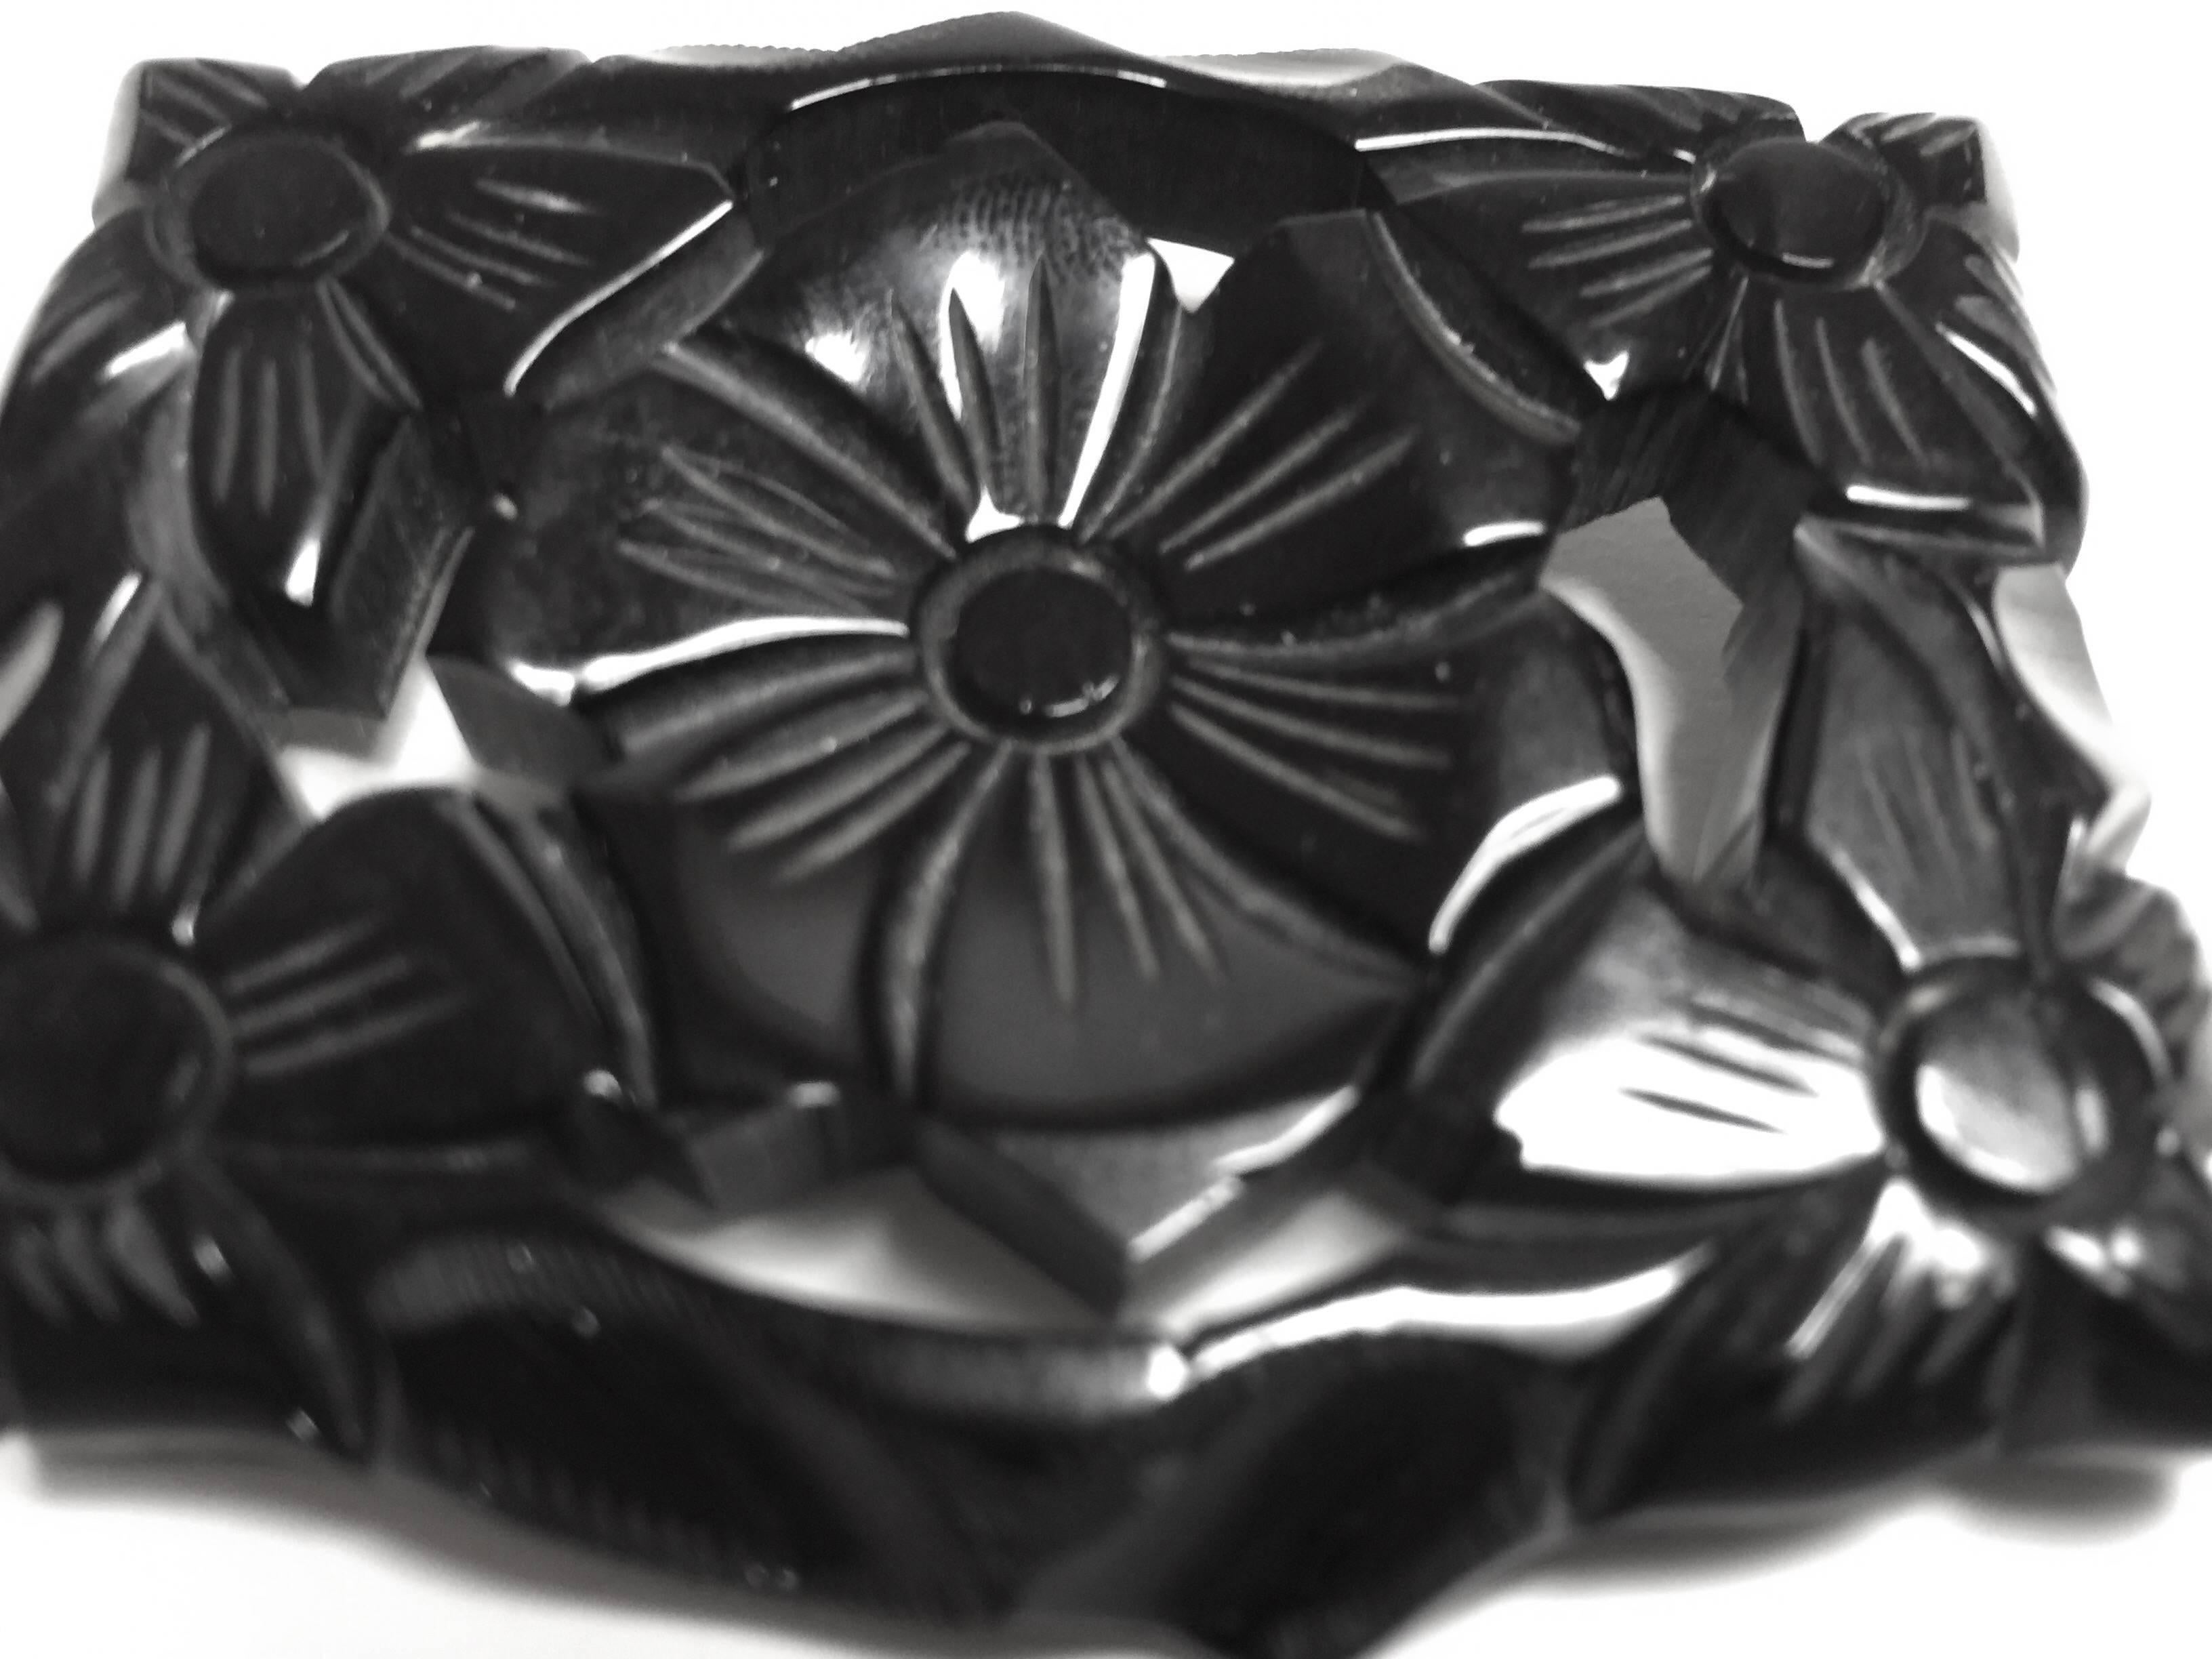 A miniature work of art, this jet black wheel carved by hand rectangular floral bakelite brooch harkens back to the mourning jewelry stylings of the Victorian Era, Sometimes early 20th century items look backwards a bit for their design inspiration,